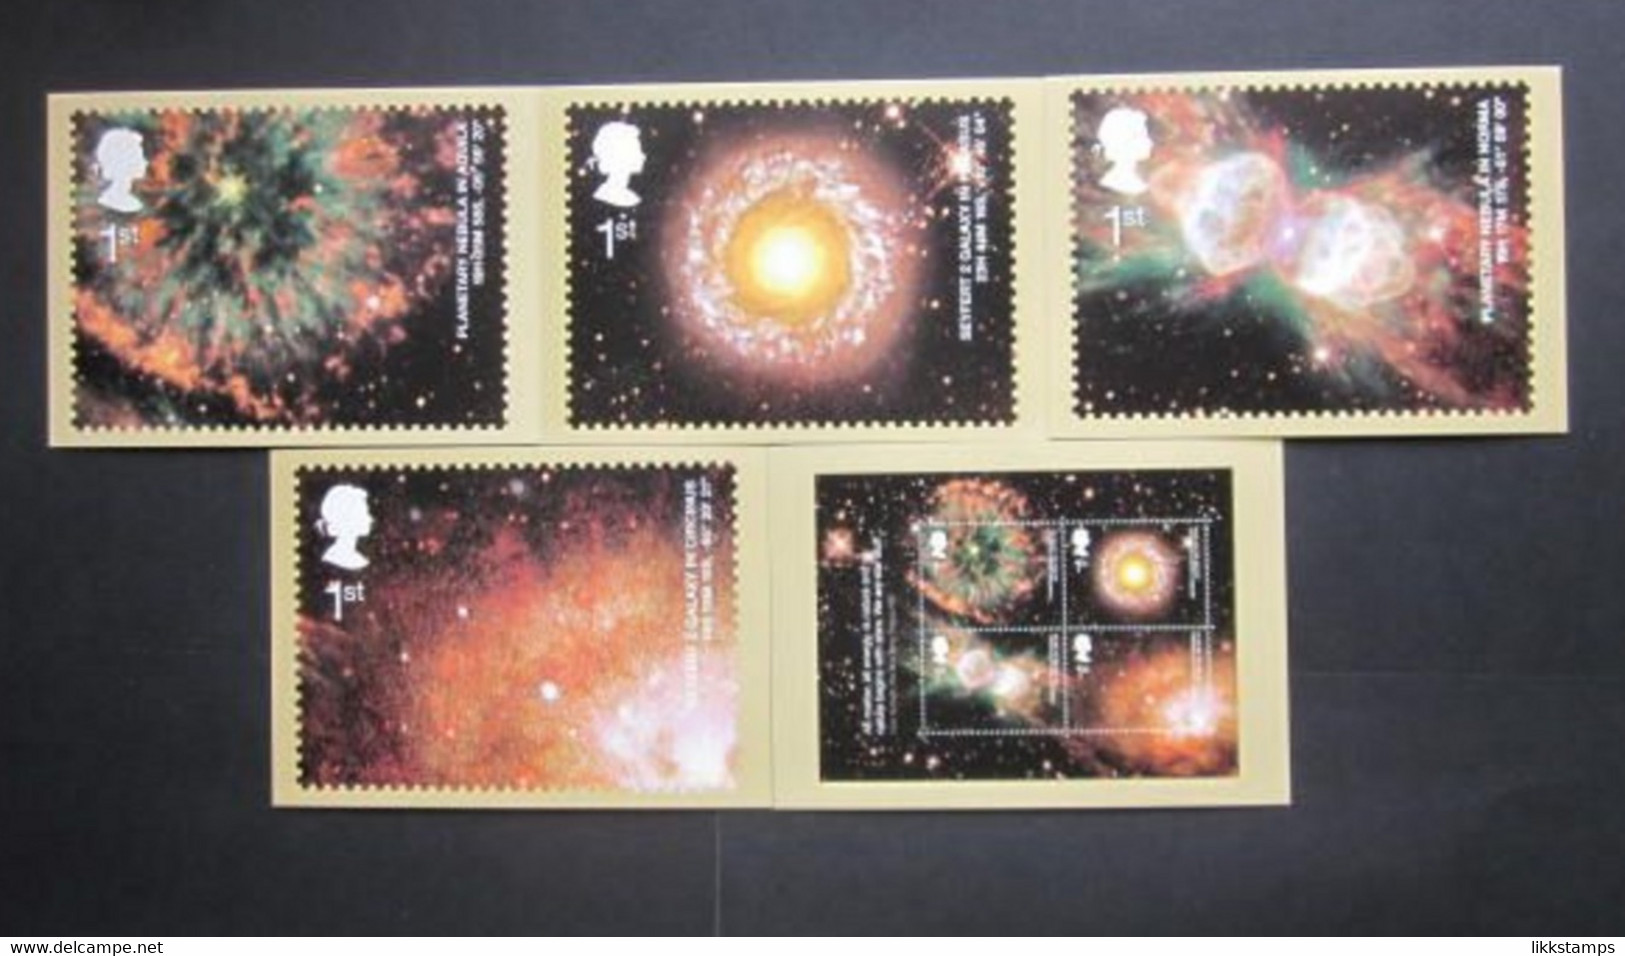 2002 ASTRONOMY MINIATURE SHEET P.H.Q. CARDS UNUSED, ISSUE No. 246 (B) #00891 - PHQ Karten